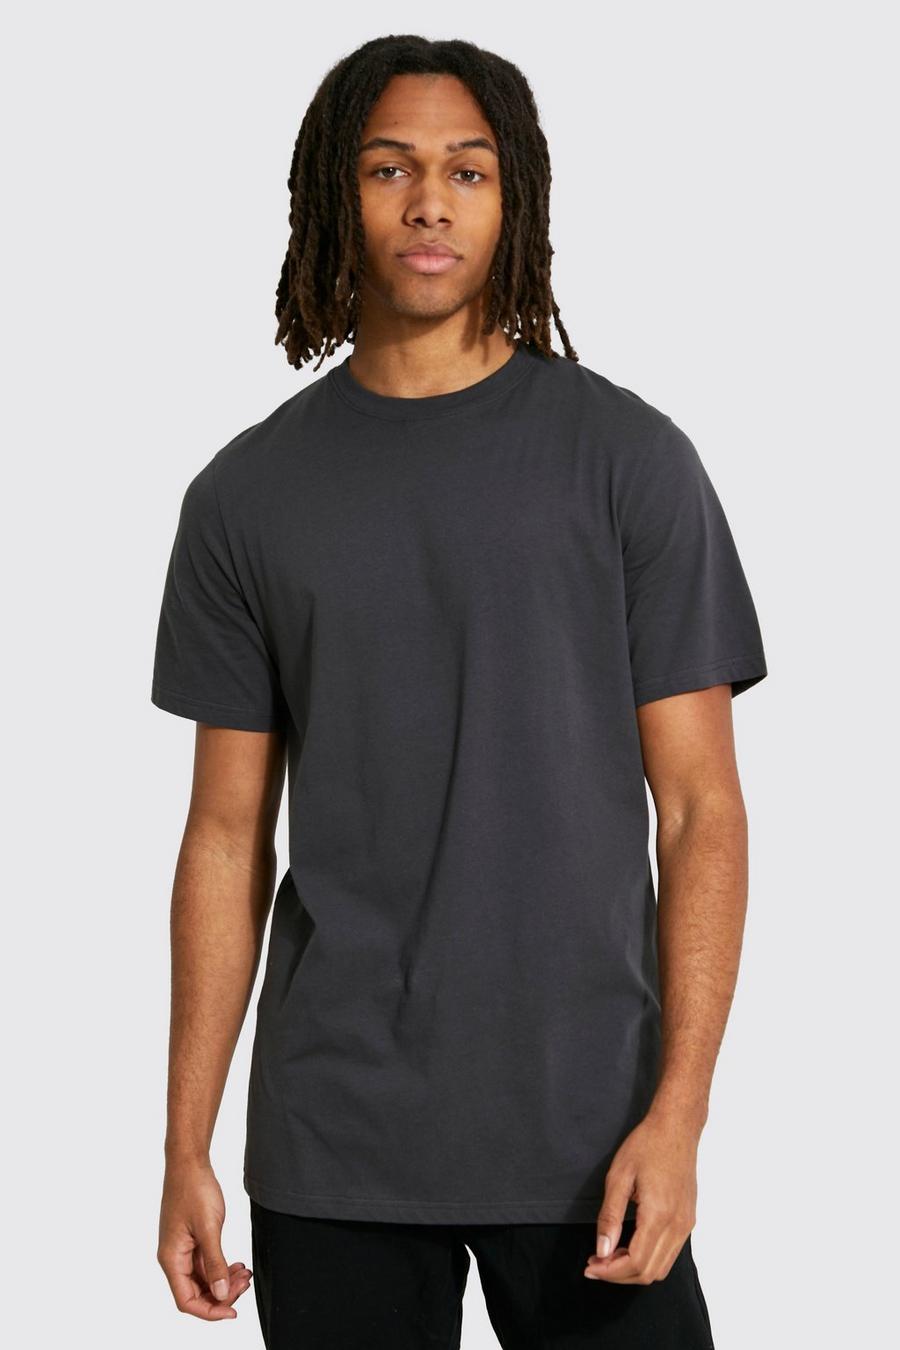 Charcoal grey Longline Crew Neck T-shirt with REEL Cotton